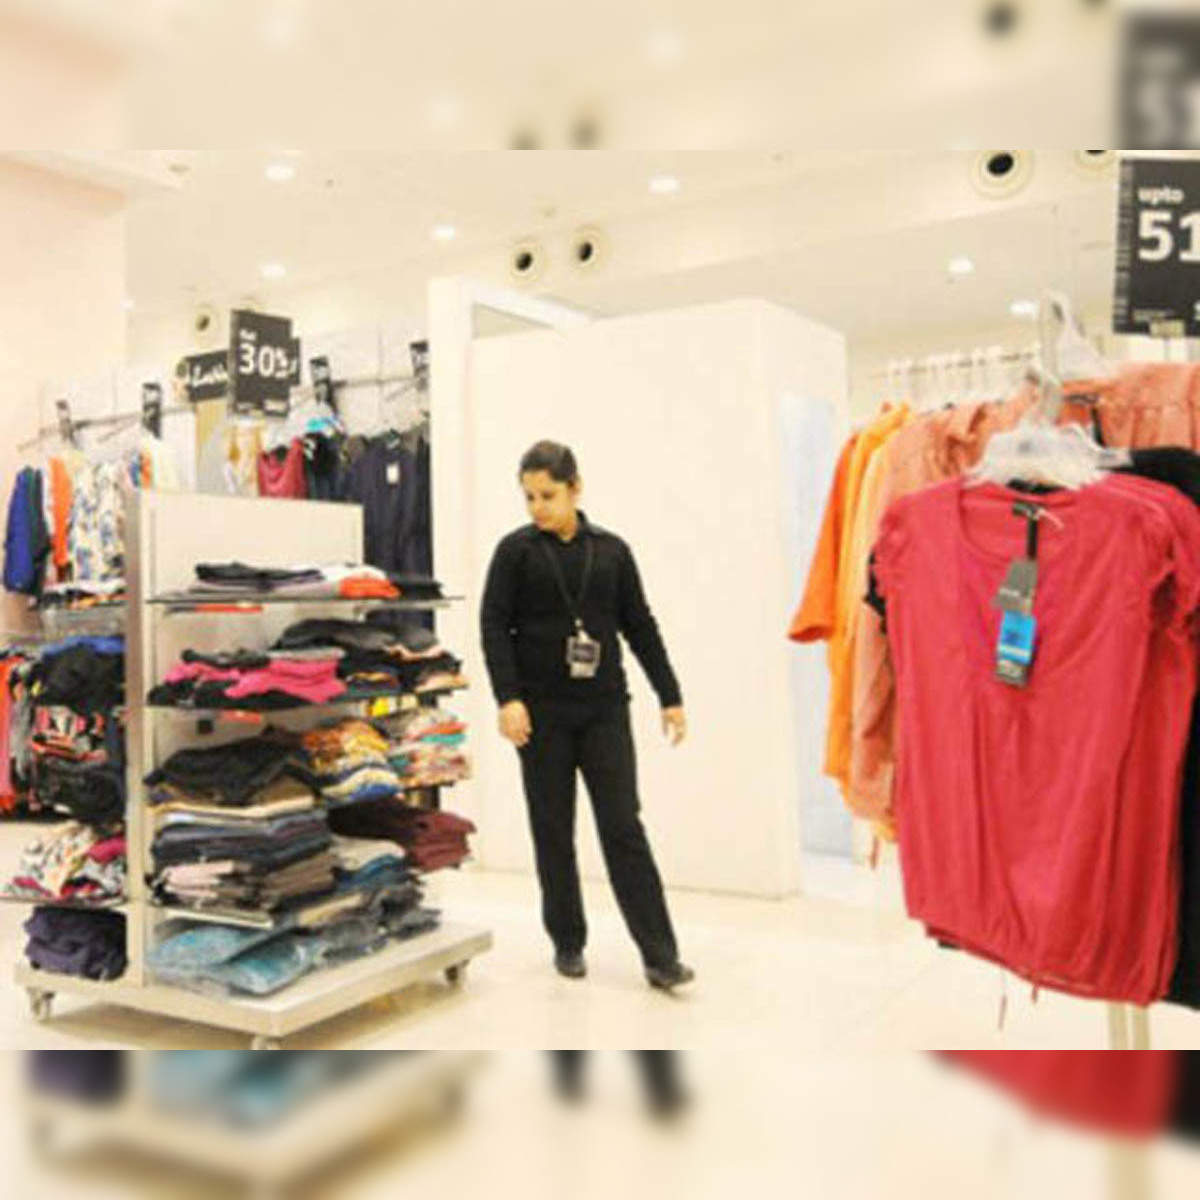 Reliance Trends all set to revolutionize Indian apparel market